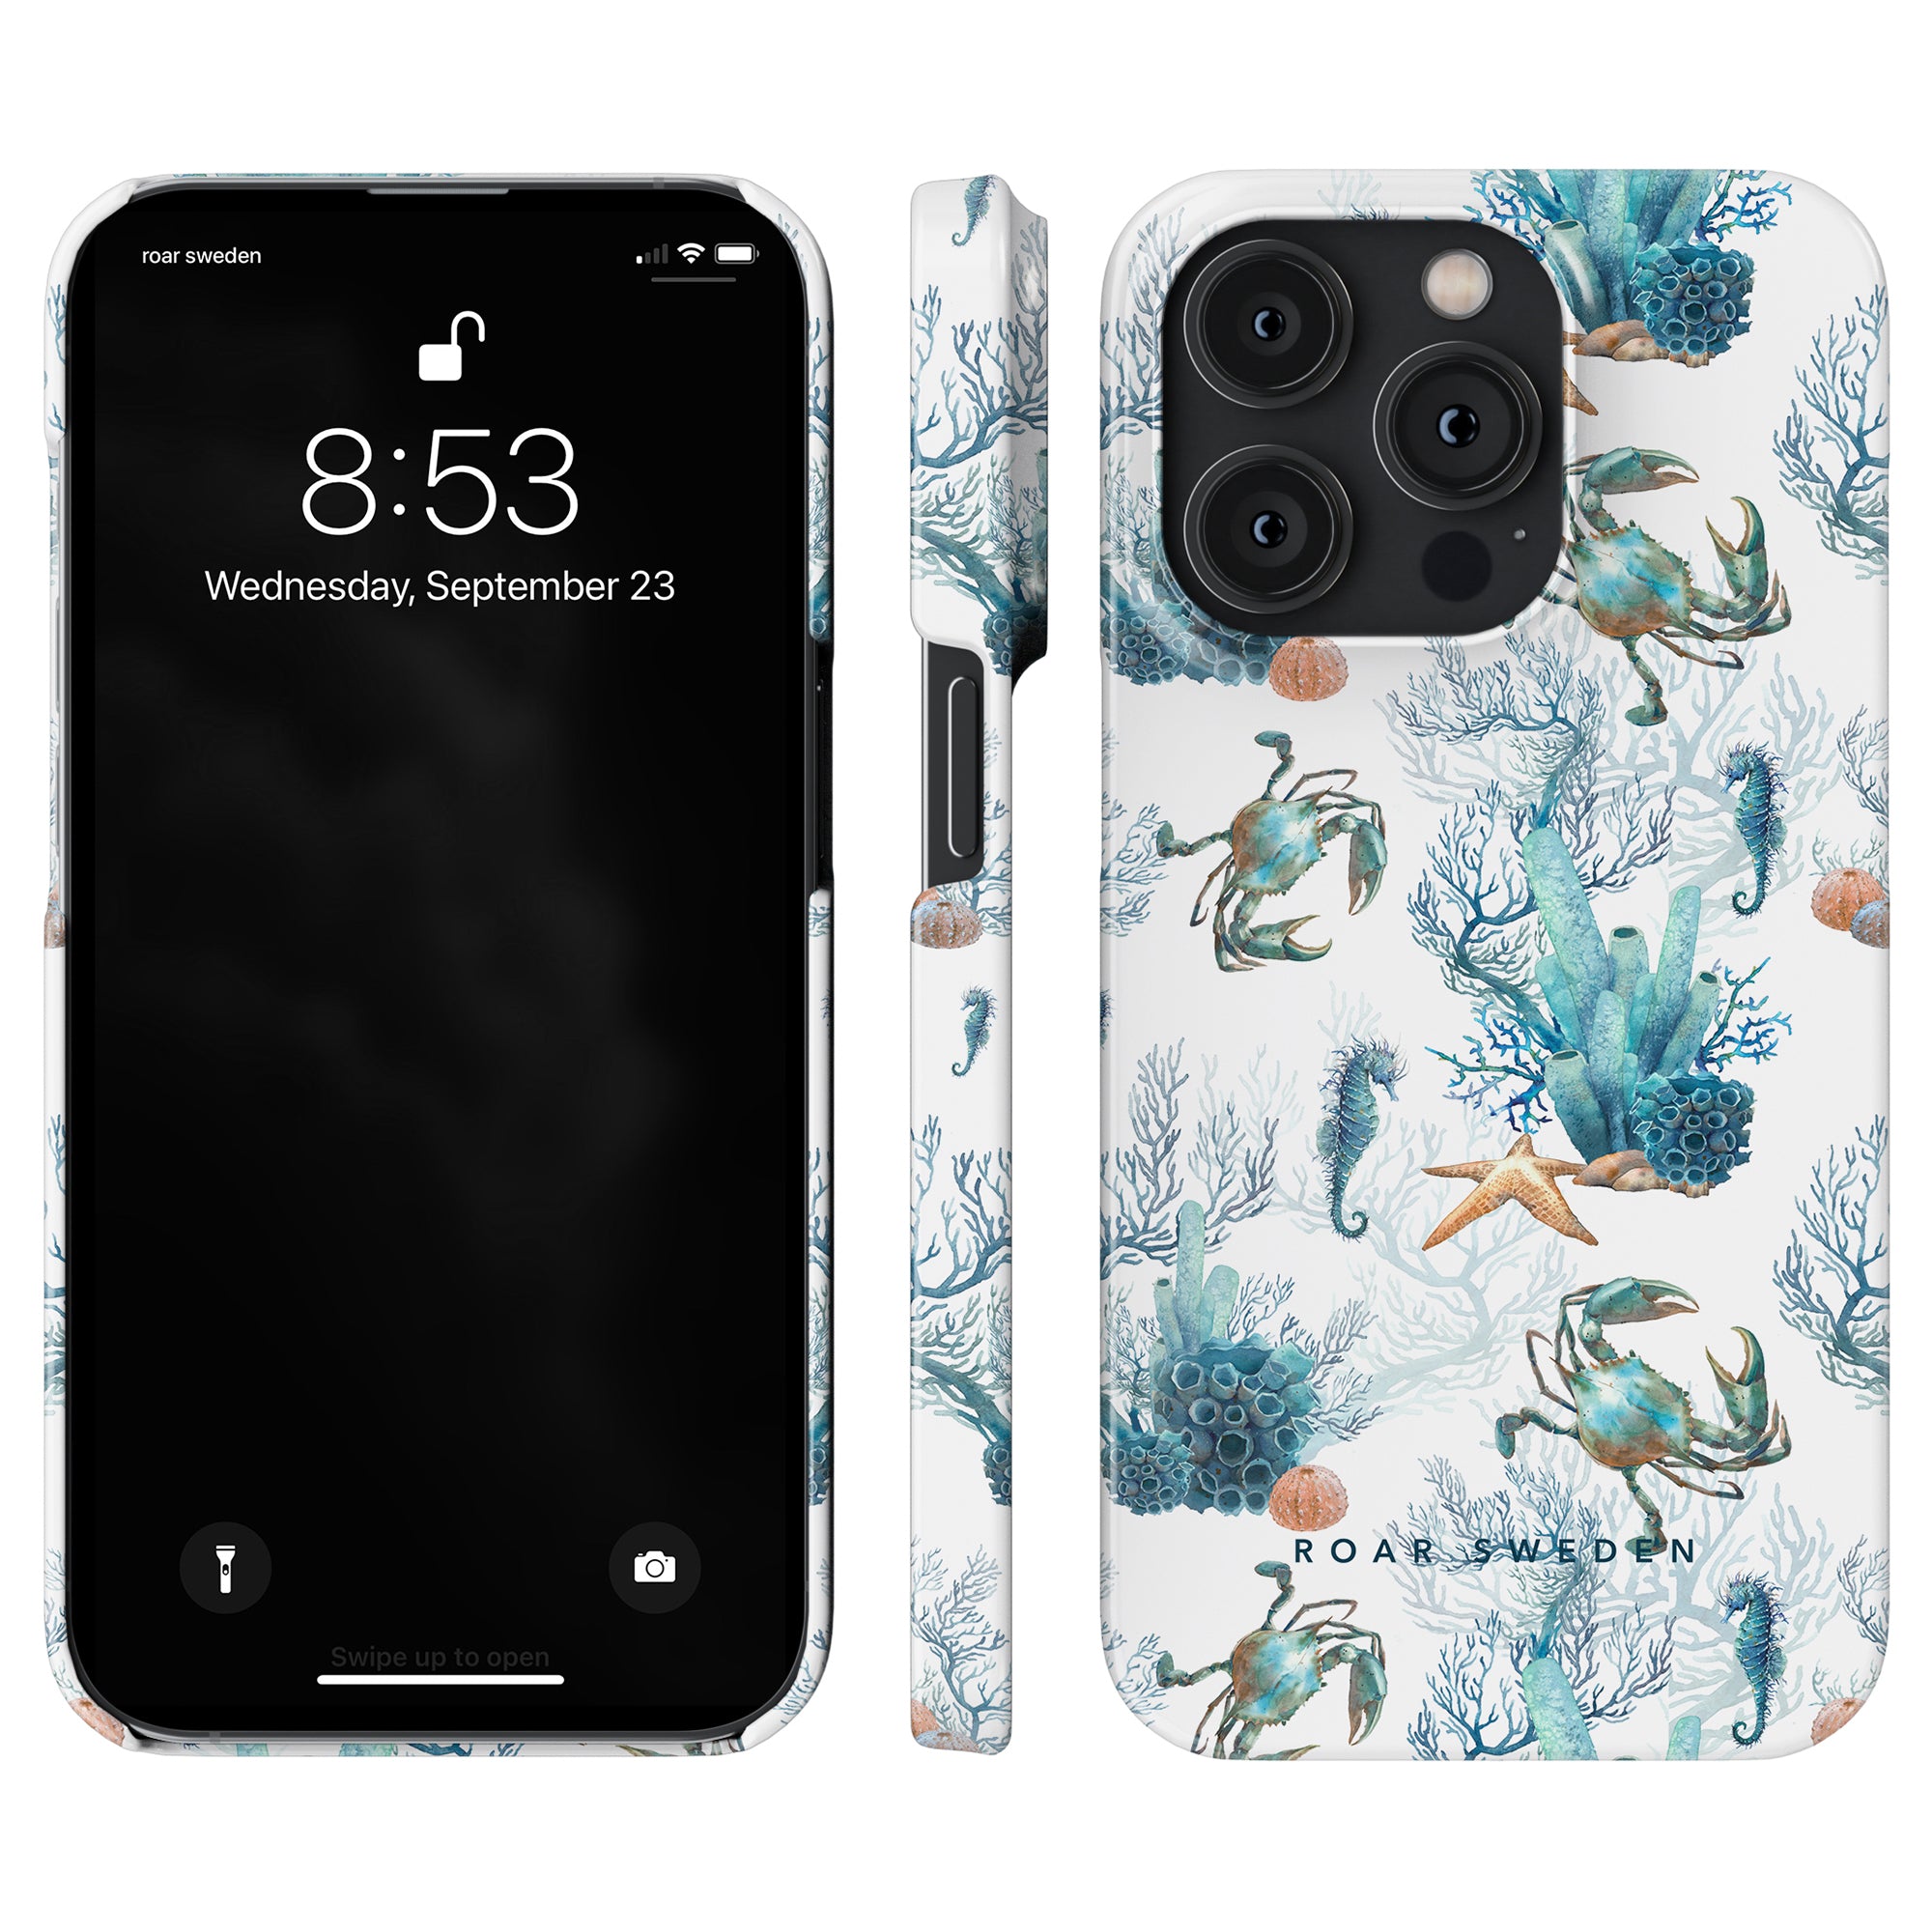 A smartphone with a Crab Reef - Slim case, displaying the time and date on its lock screen, is an ideal SEO-optimized product description for those seeking a stylish yet functional accessory.